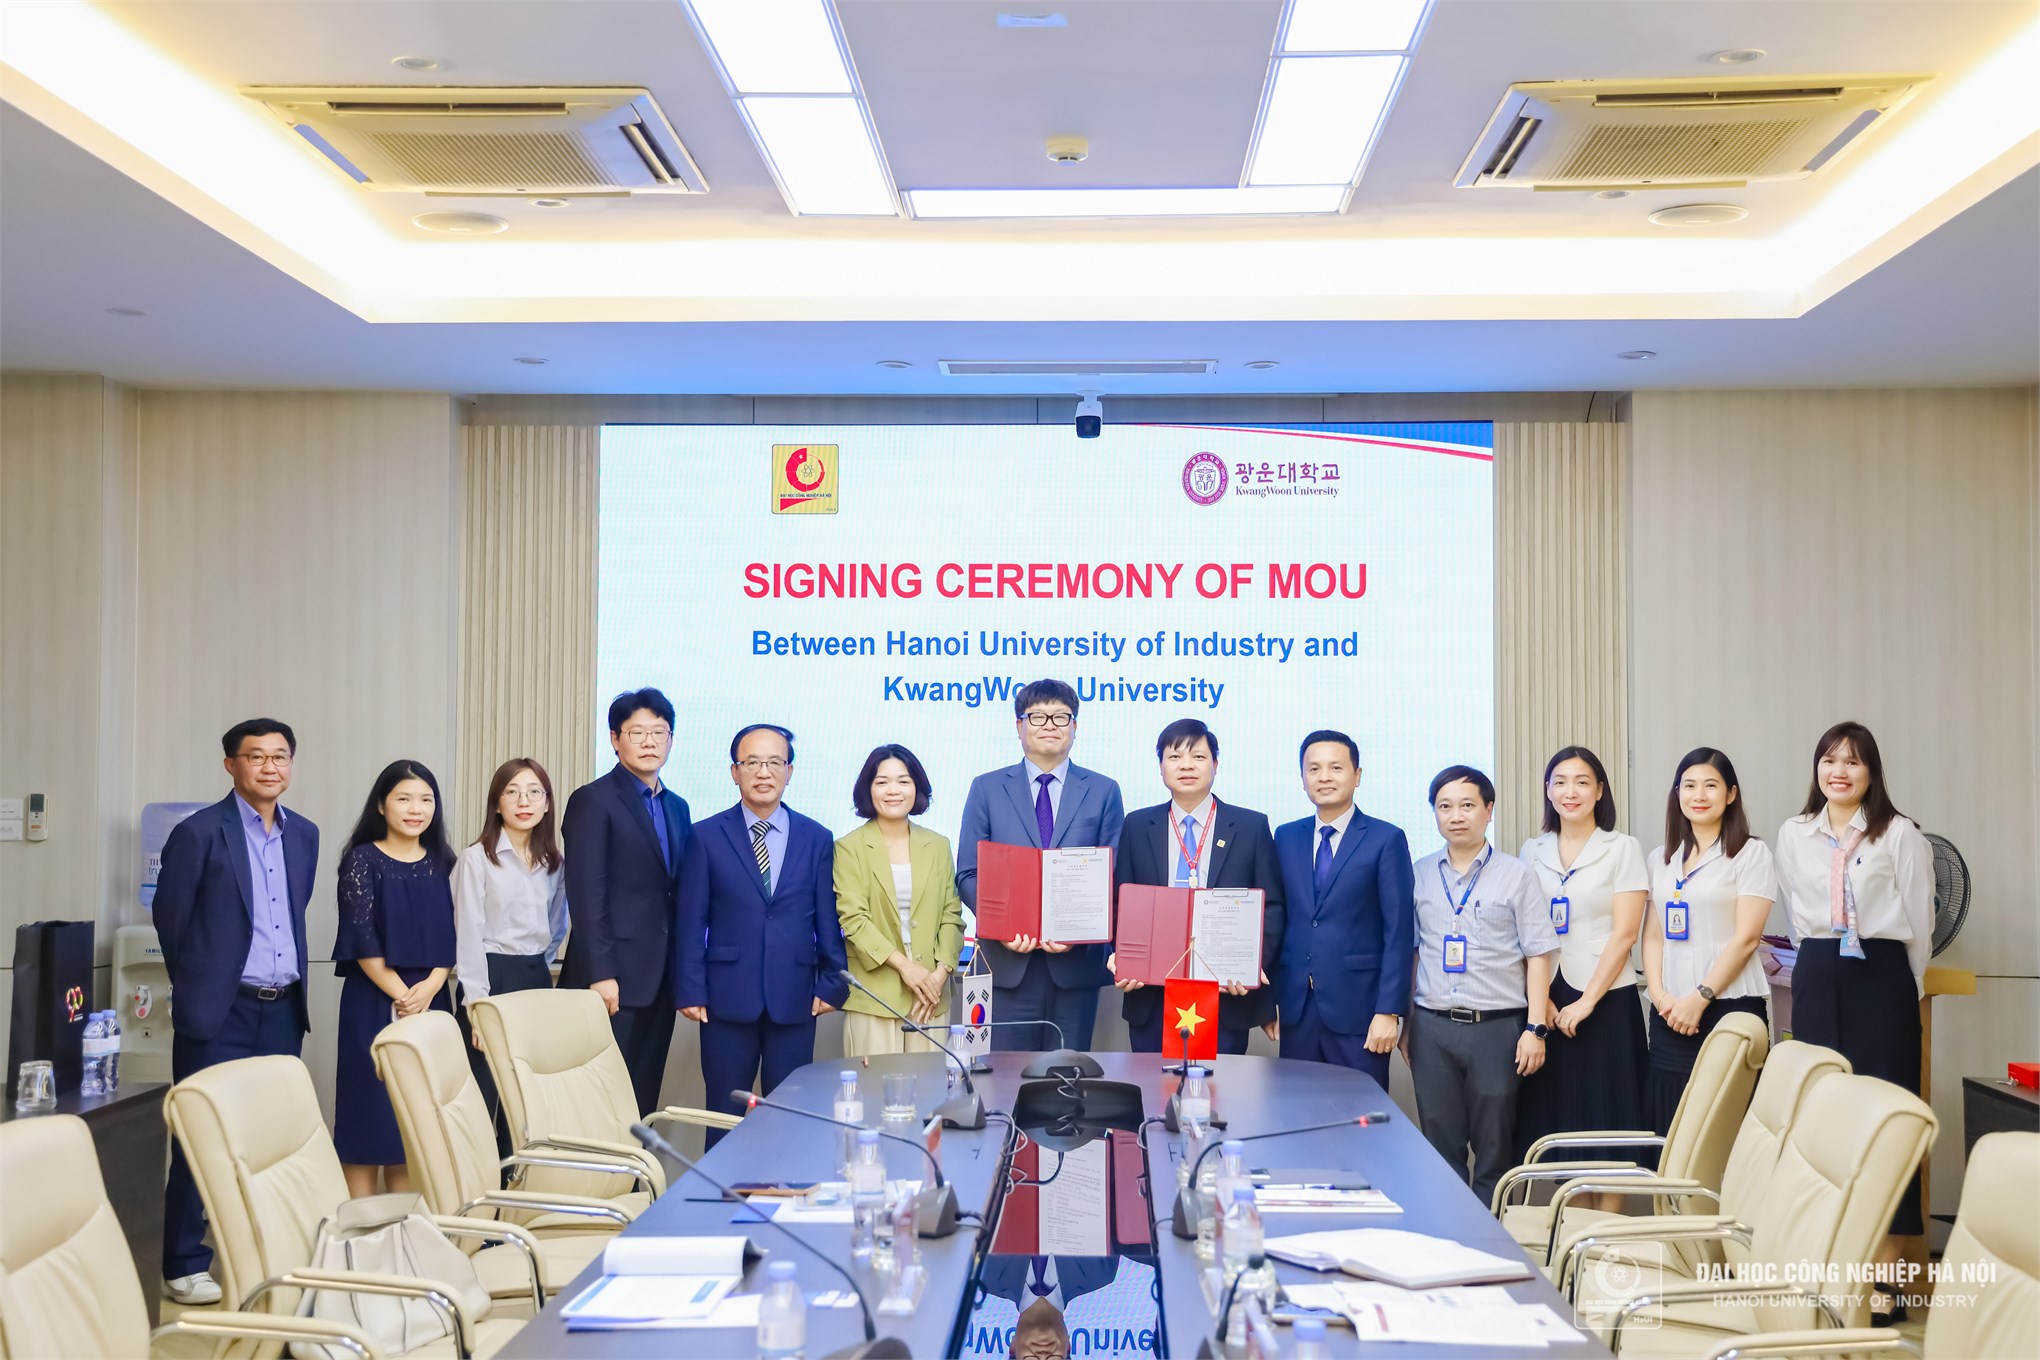 Hanoi University of Industry (HaUI) and Kwangwoon University signed a MOU